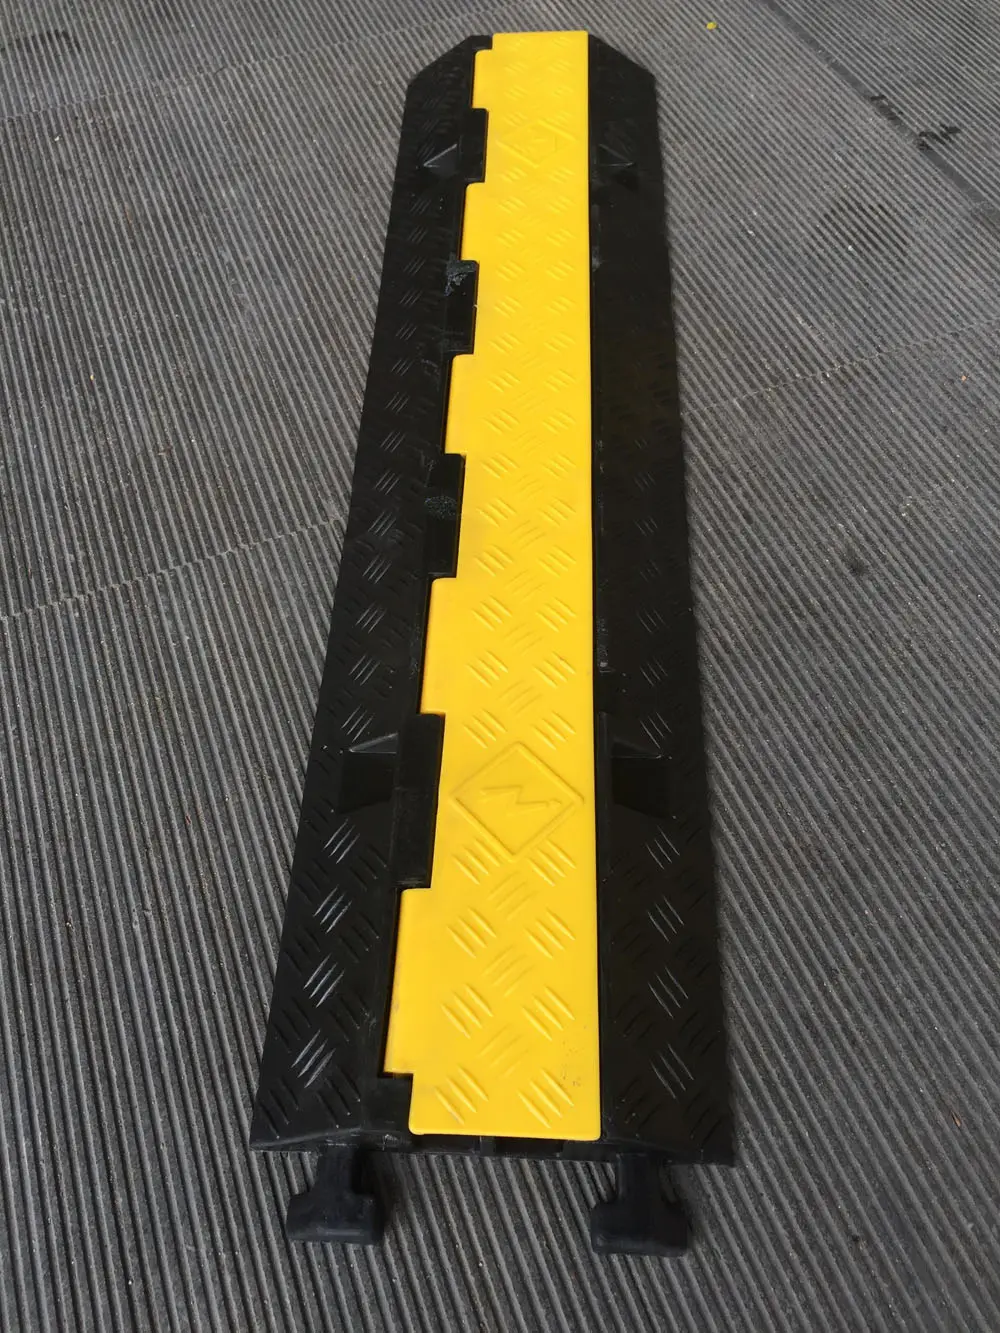 2 channel Cable protector / Cover/Cable Guard cable ramp bridge